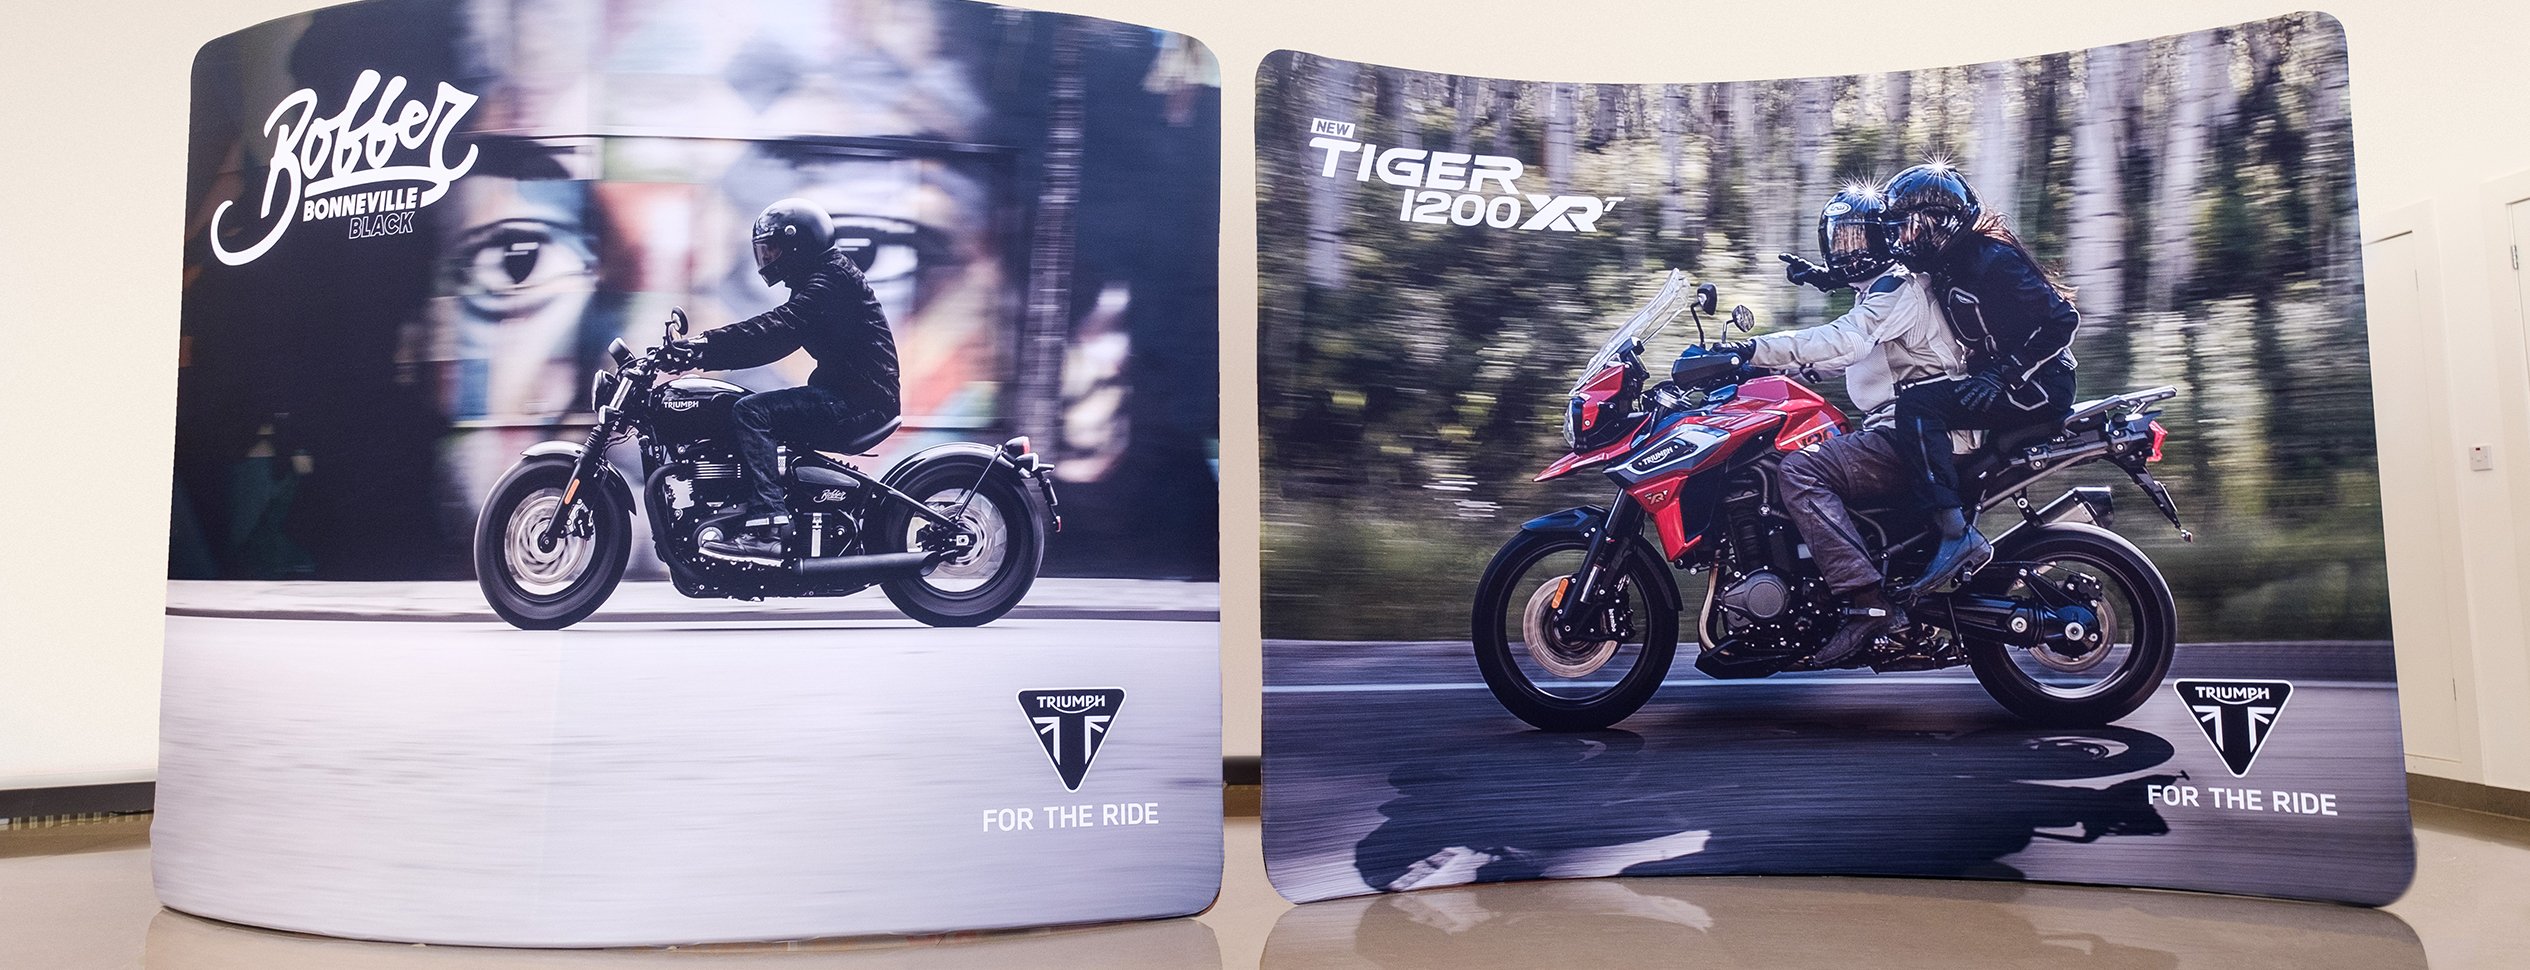 Two large format display banners promoting a pair of Triumph motorcycles